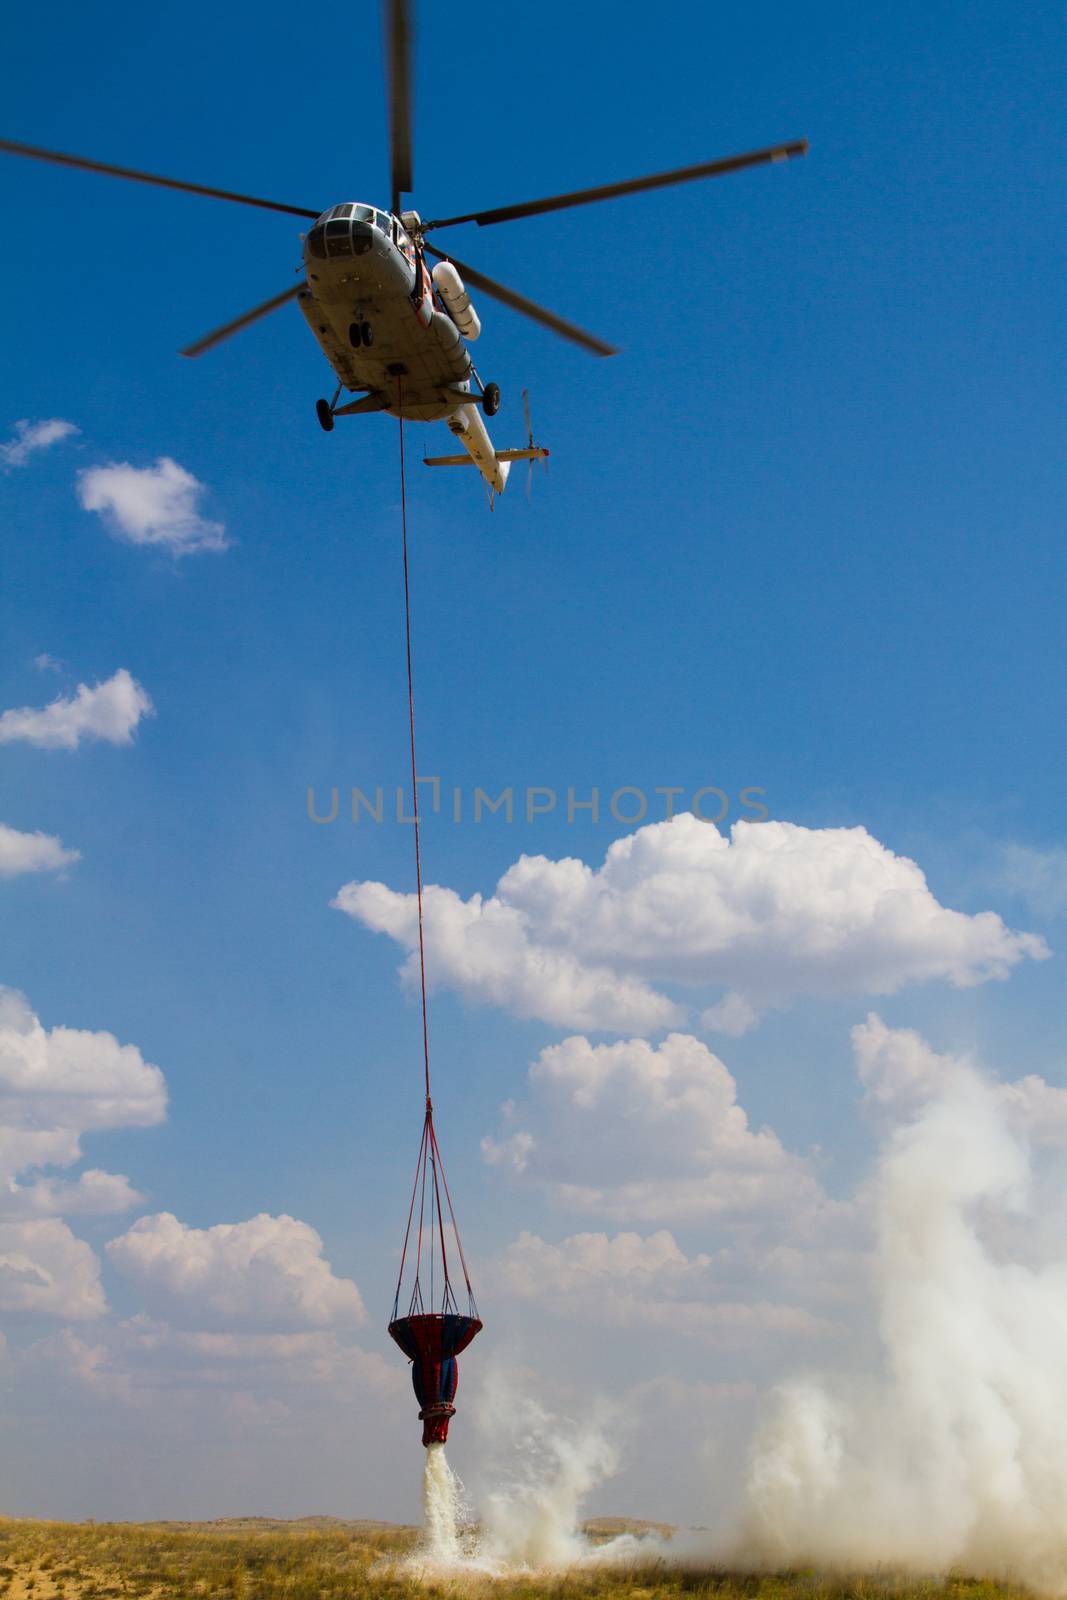 Firefighting helicopter attacks a wildfire with a cascading water release from its water bucket.